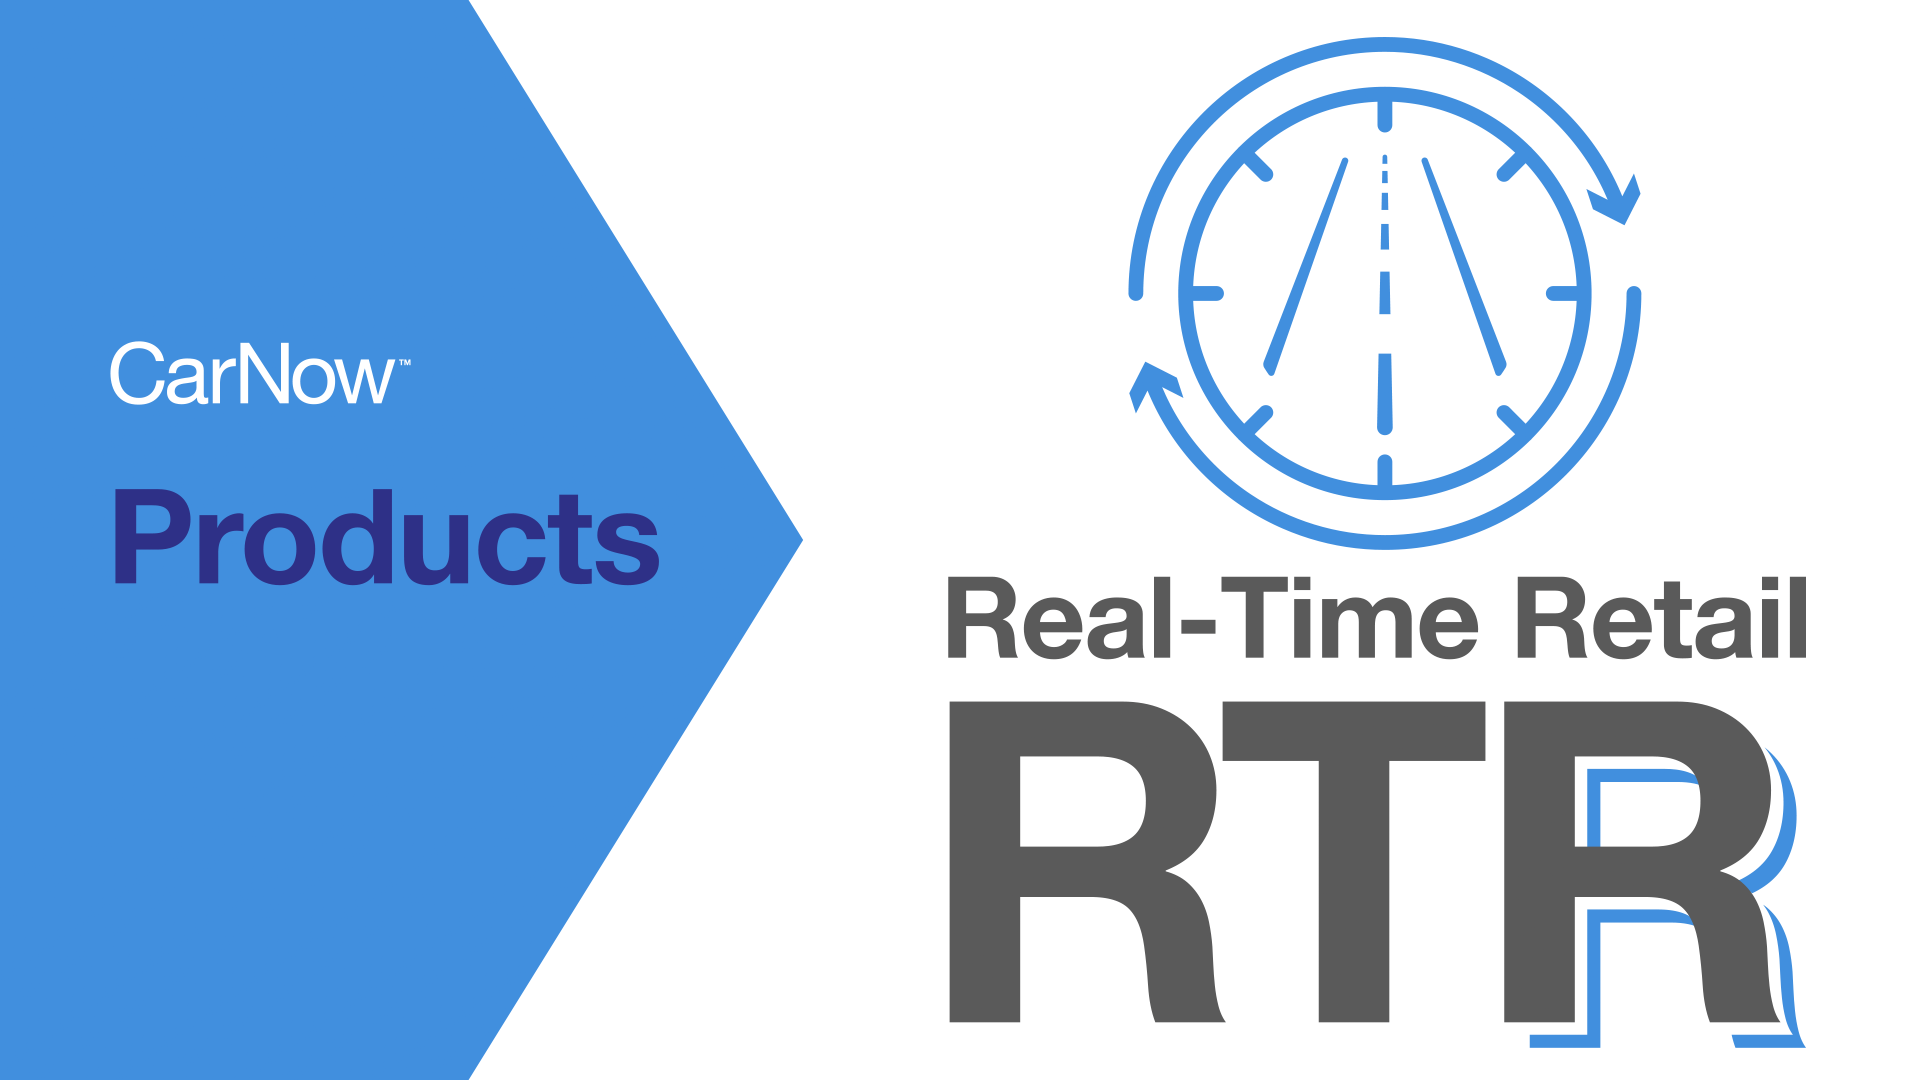 Real-Time Retail